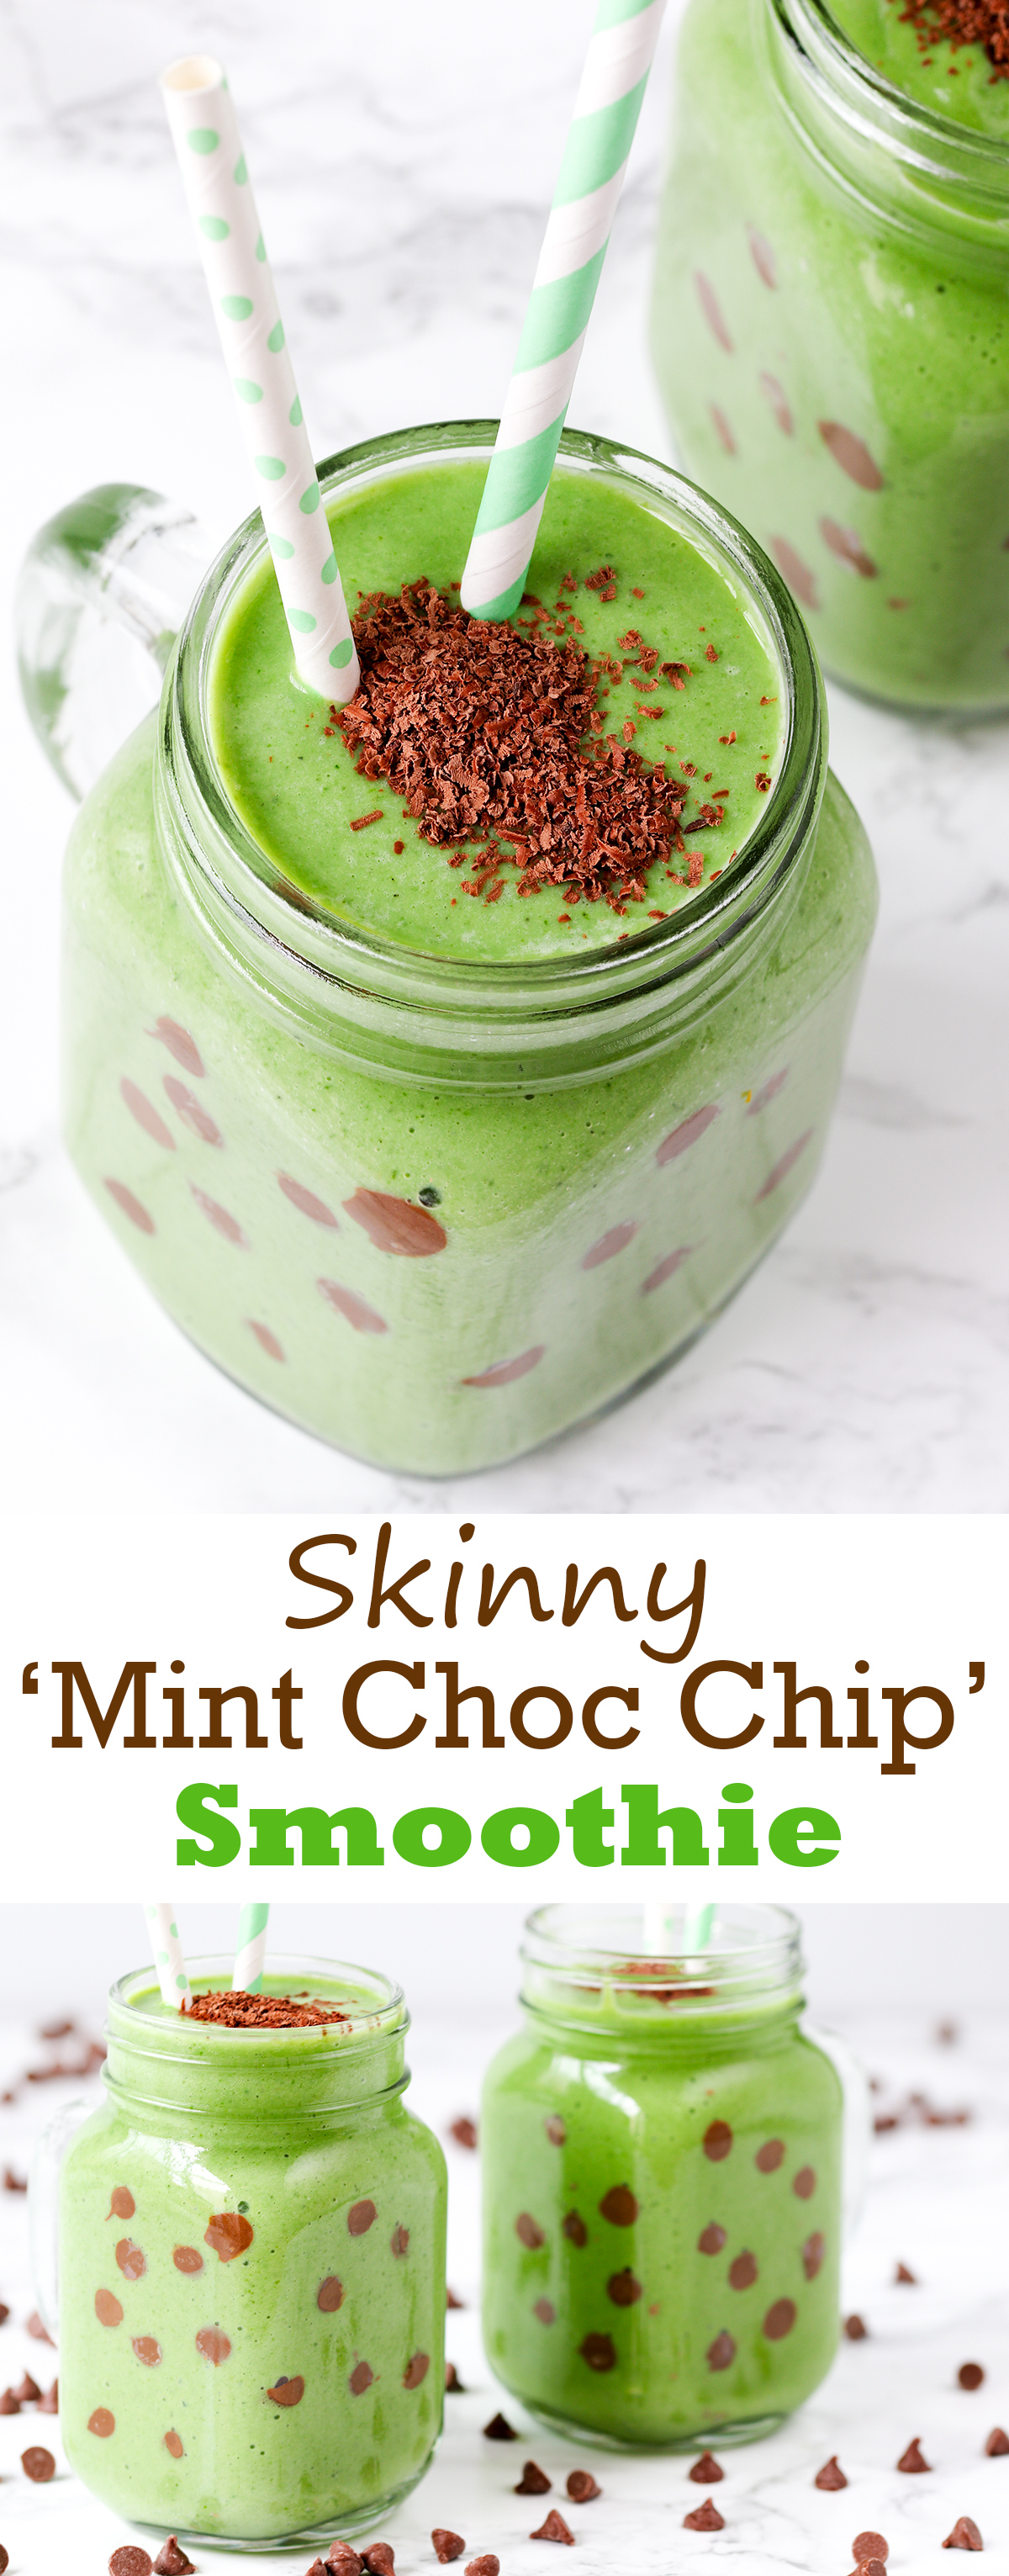 A healthy green smoothie - made more inviting by the addition of peppermint and chocolate chips